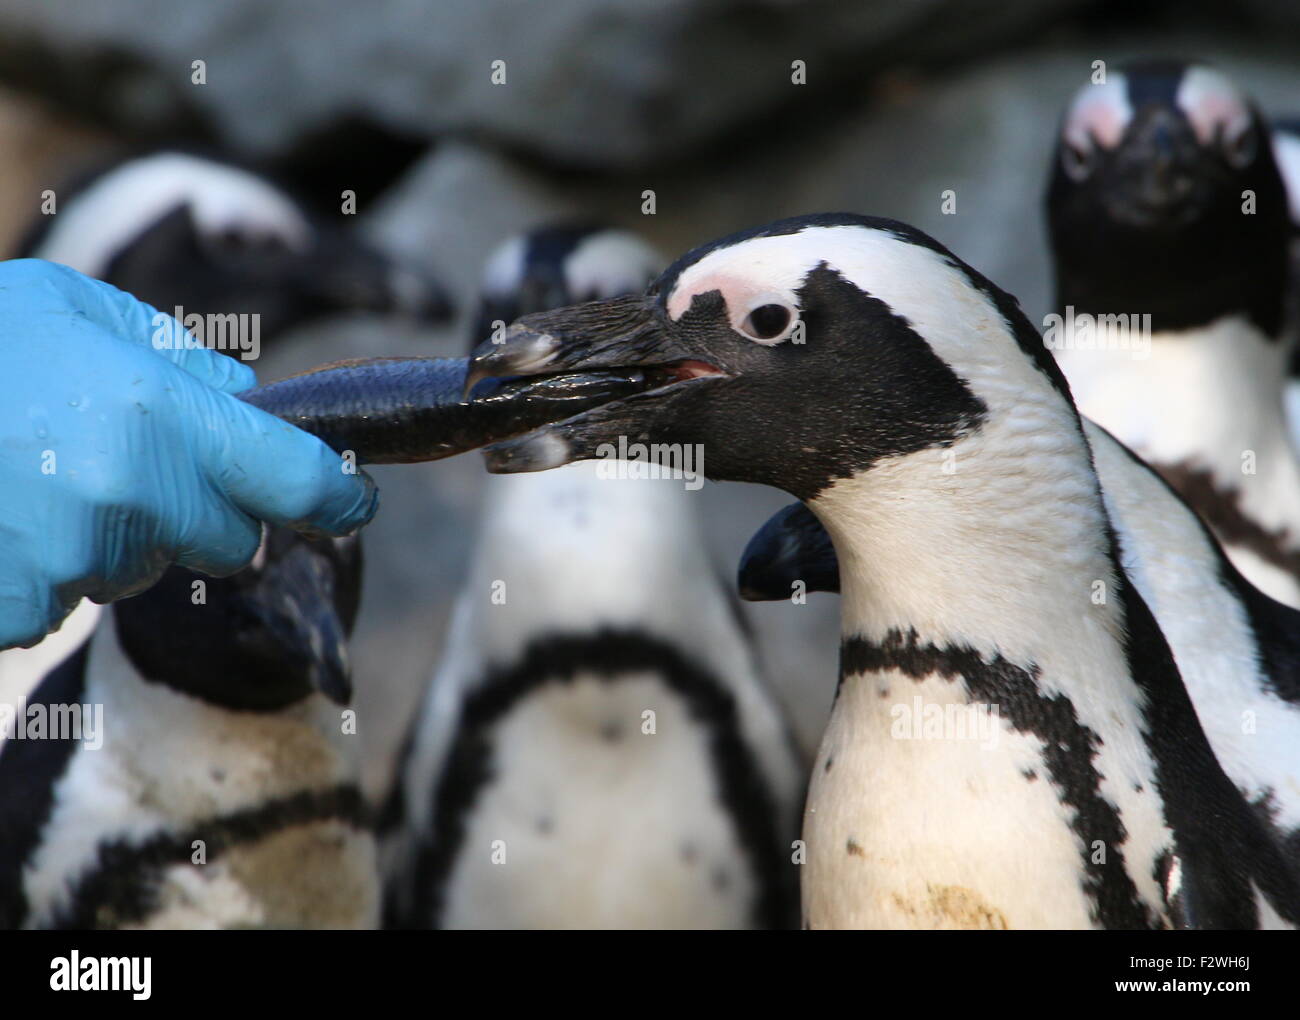 African Black footed penguins (Spheniscus demersus) being fed fish by a bird handler at Burgers Zoo, Arnhem, The Netherlands Stock Photo